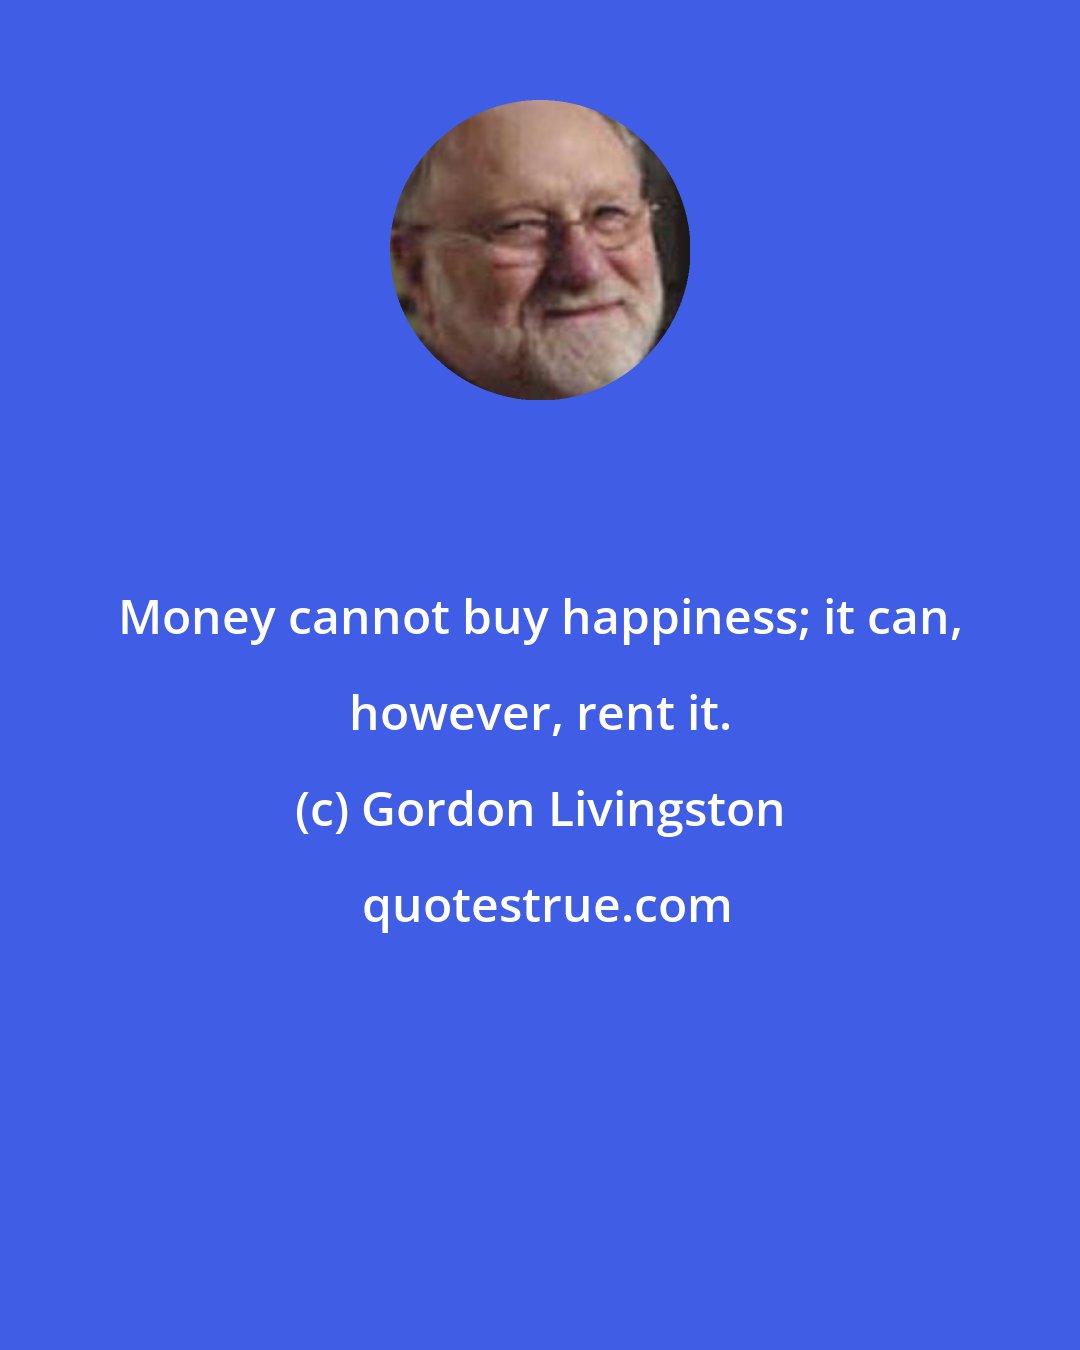 Gordon Livingston: Money cannot buy happiness; it can, however, rent it.